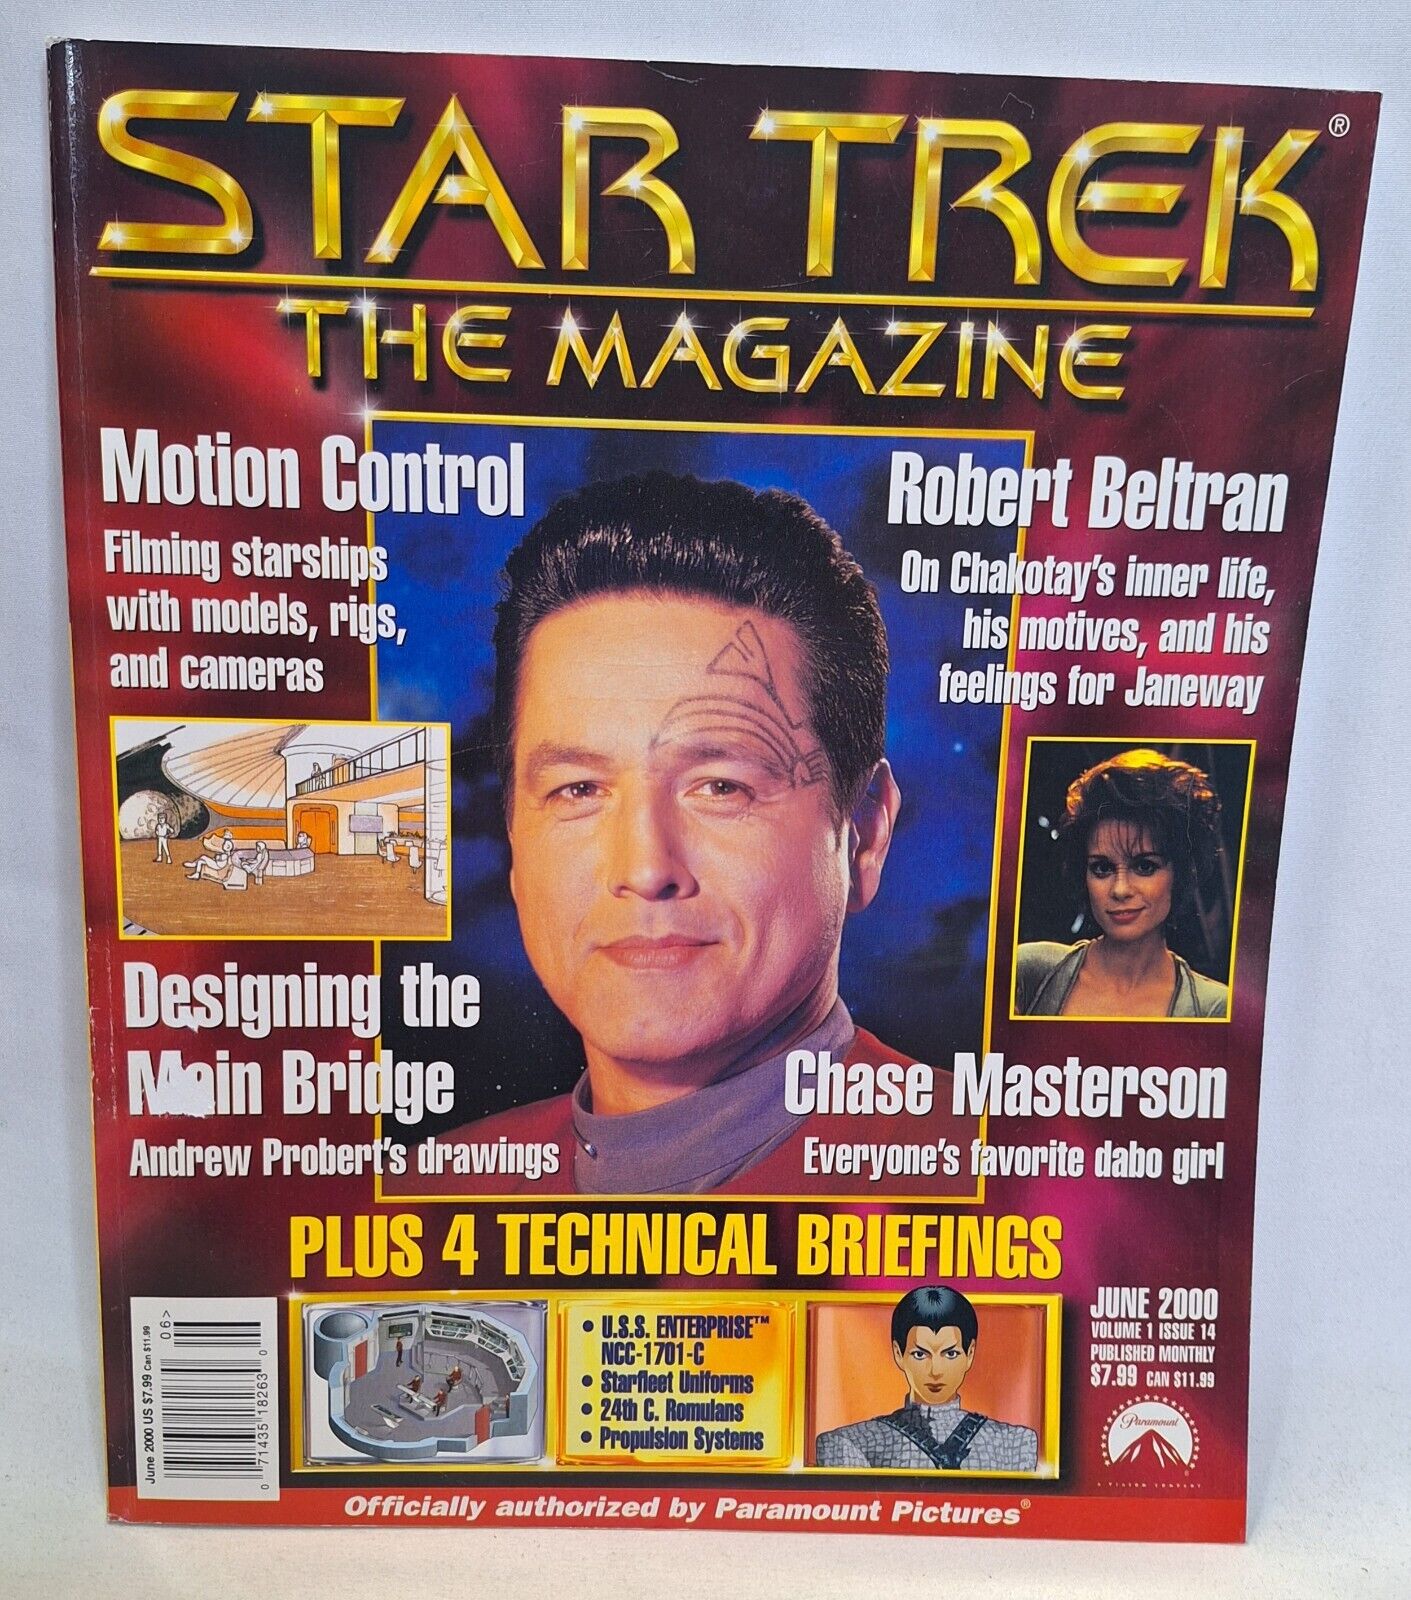 Star Trek: The Magazine June 2000 Issue (Out of Production) Excellent Condition